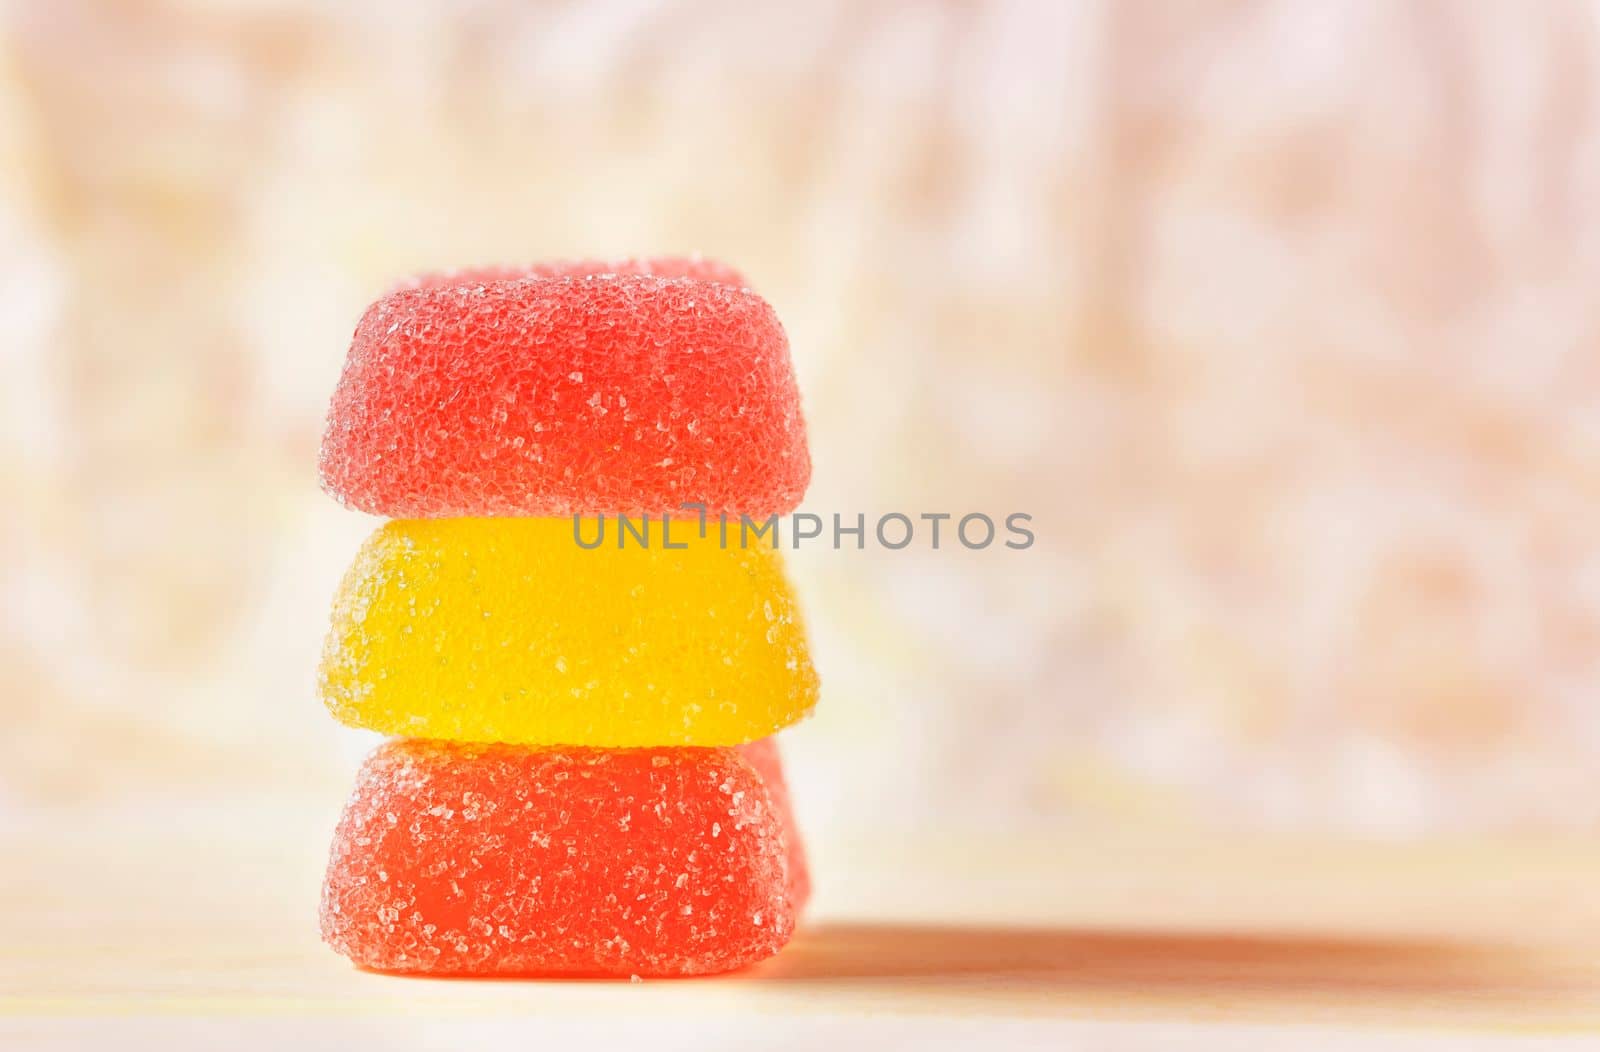 Red and yellow sugar fuit candies ,ready to eat unhelthy sweets